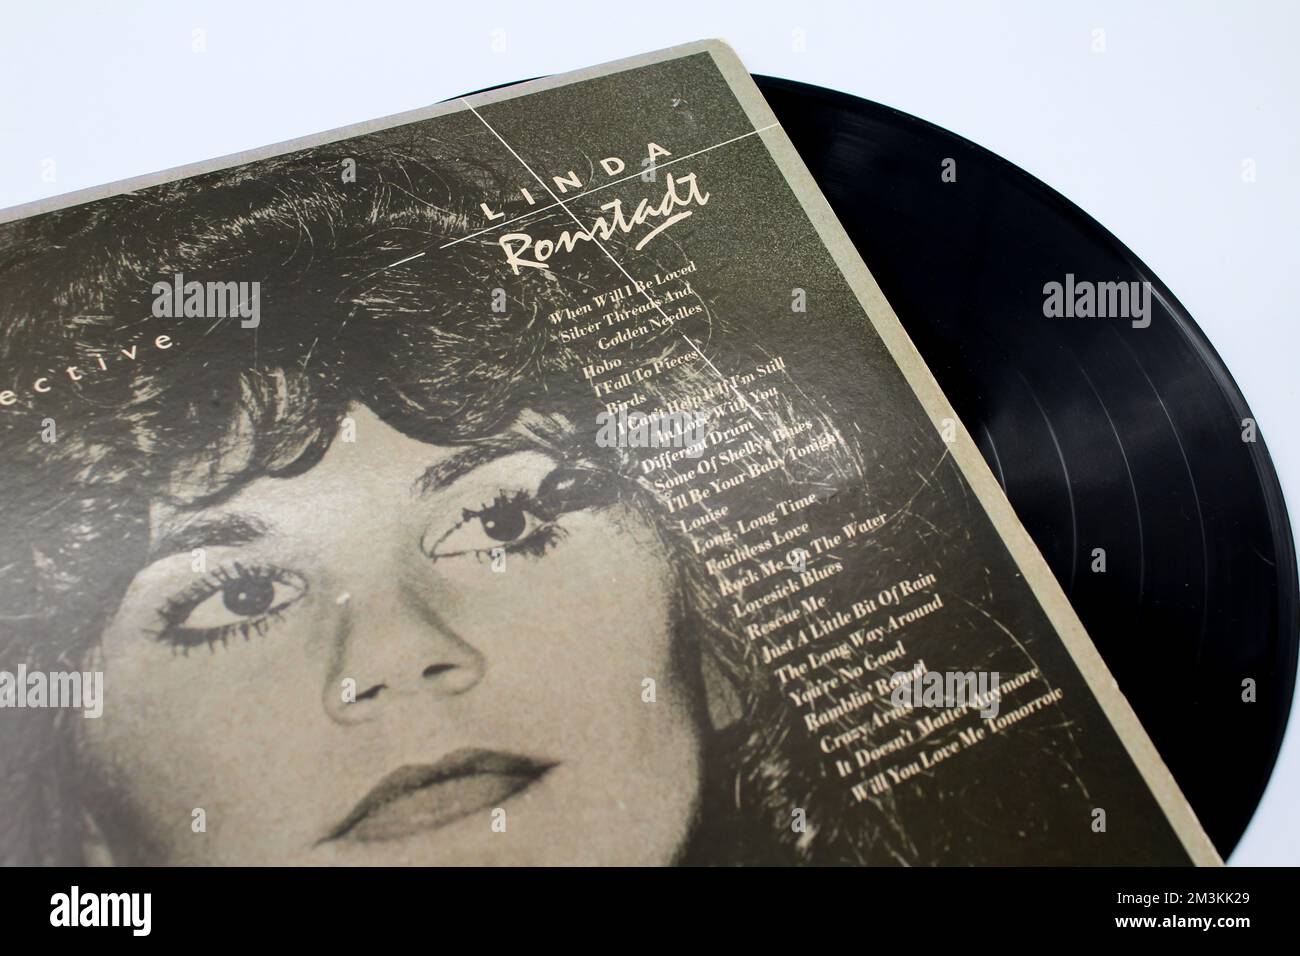 Rock, country rock and folk rock artist, Linda Ronstadt music album on vinyl record LP disc. Titled: A Retrospective, a Compilation of songs Stock Photo